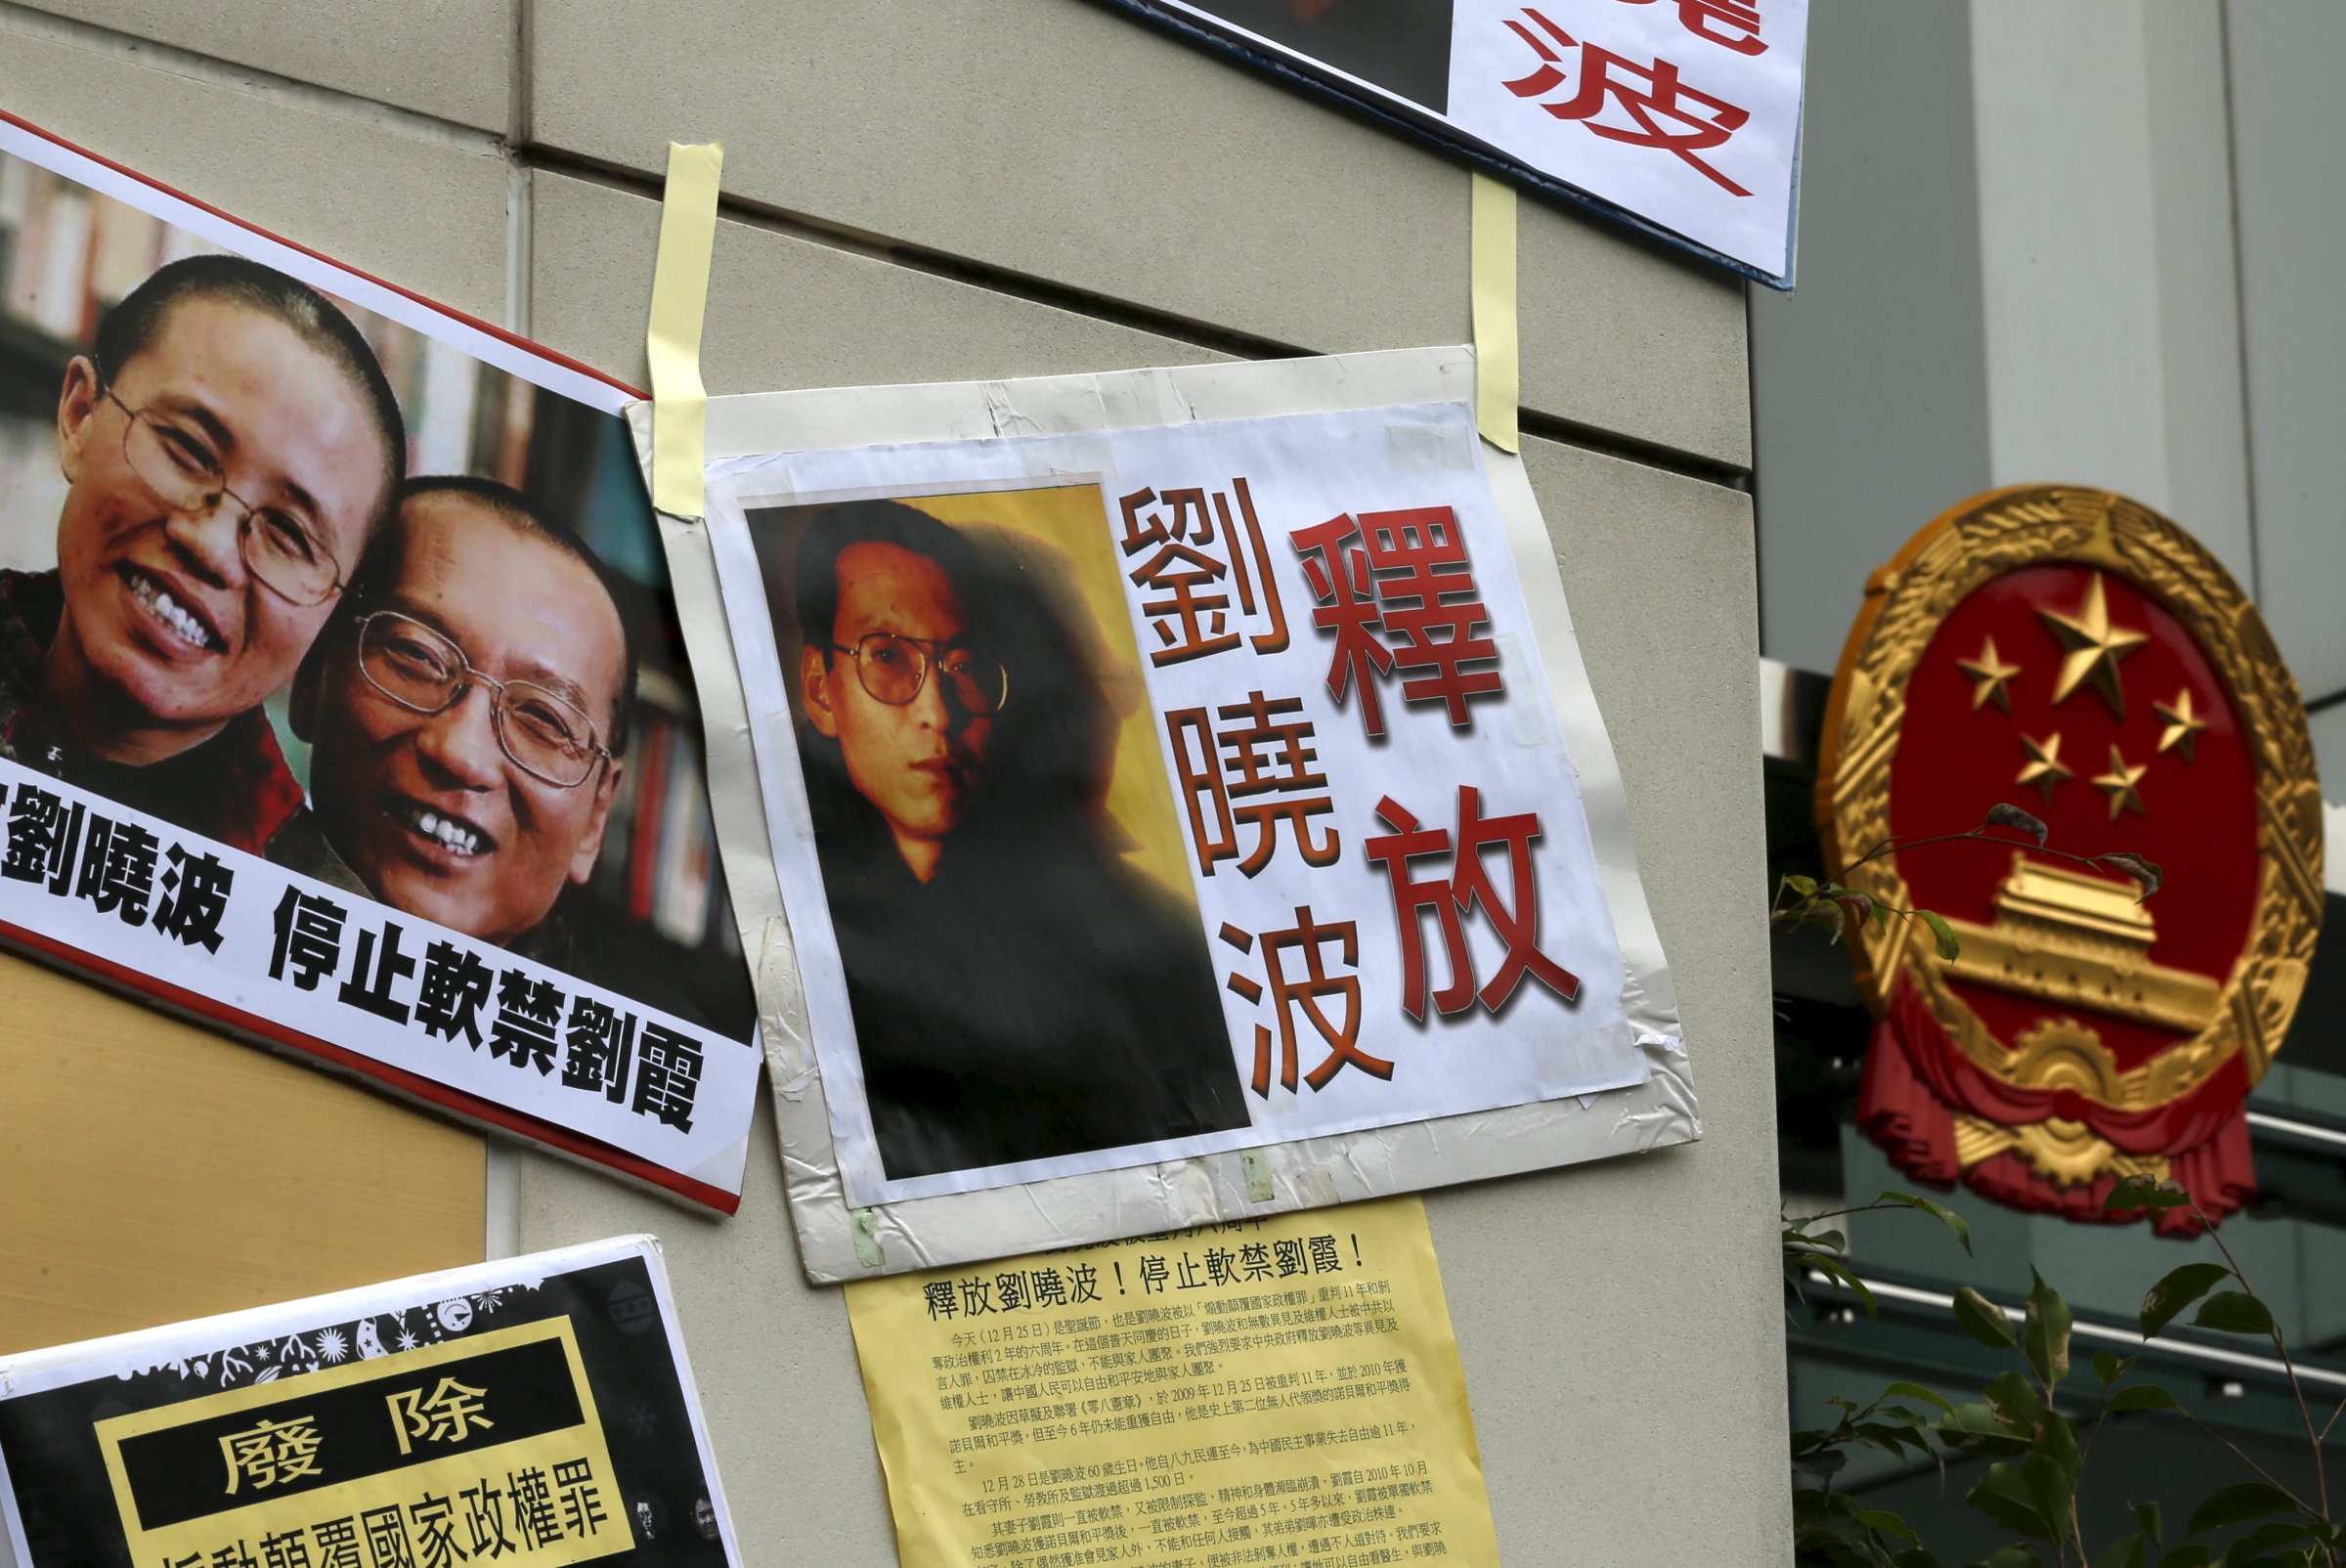 Signs and portraits of jailed Chinese Nobel Peace Prize laureate Liu Xiaobo and his wife Liu Xia are seen in front of the national emblem of China during a protest outside the Chinese liaison office in Hong Kong, China